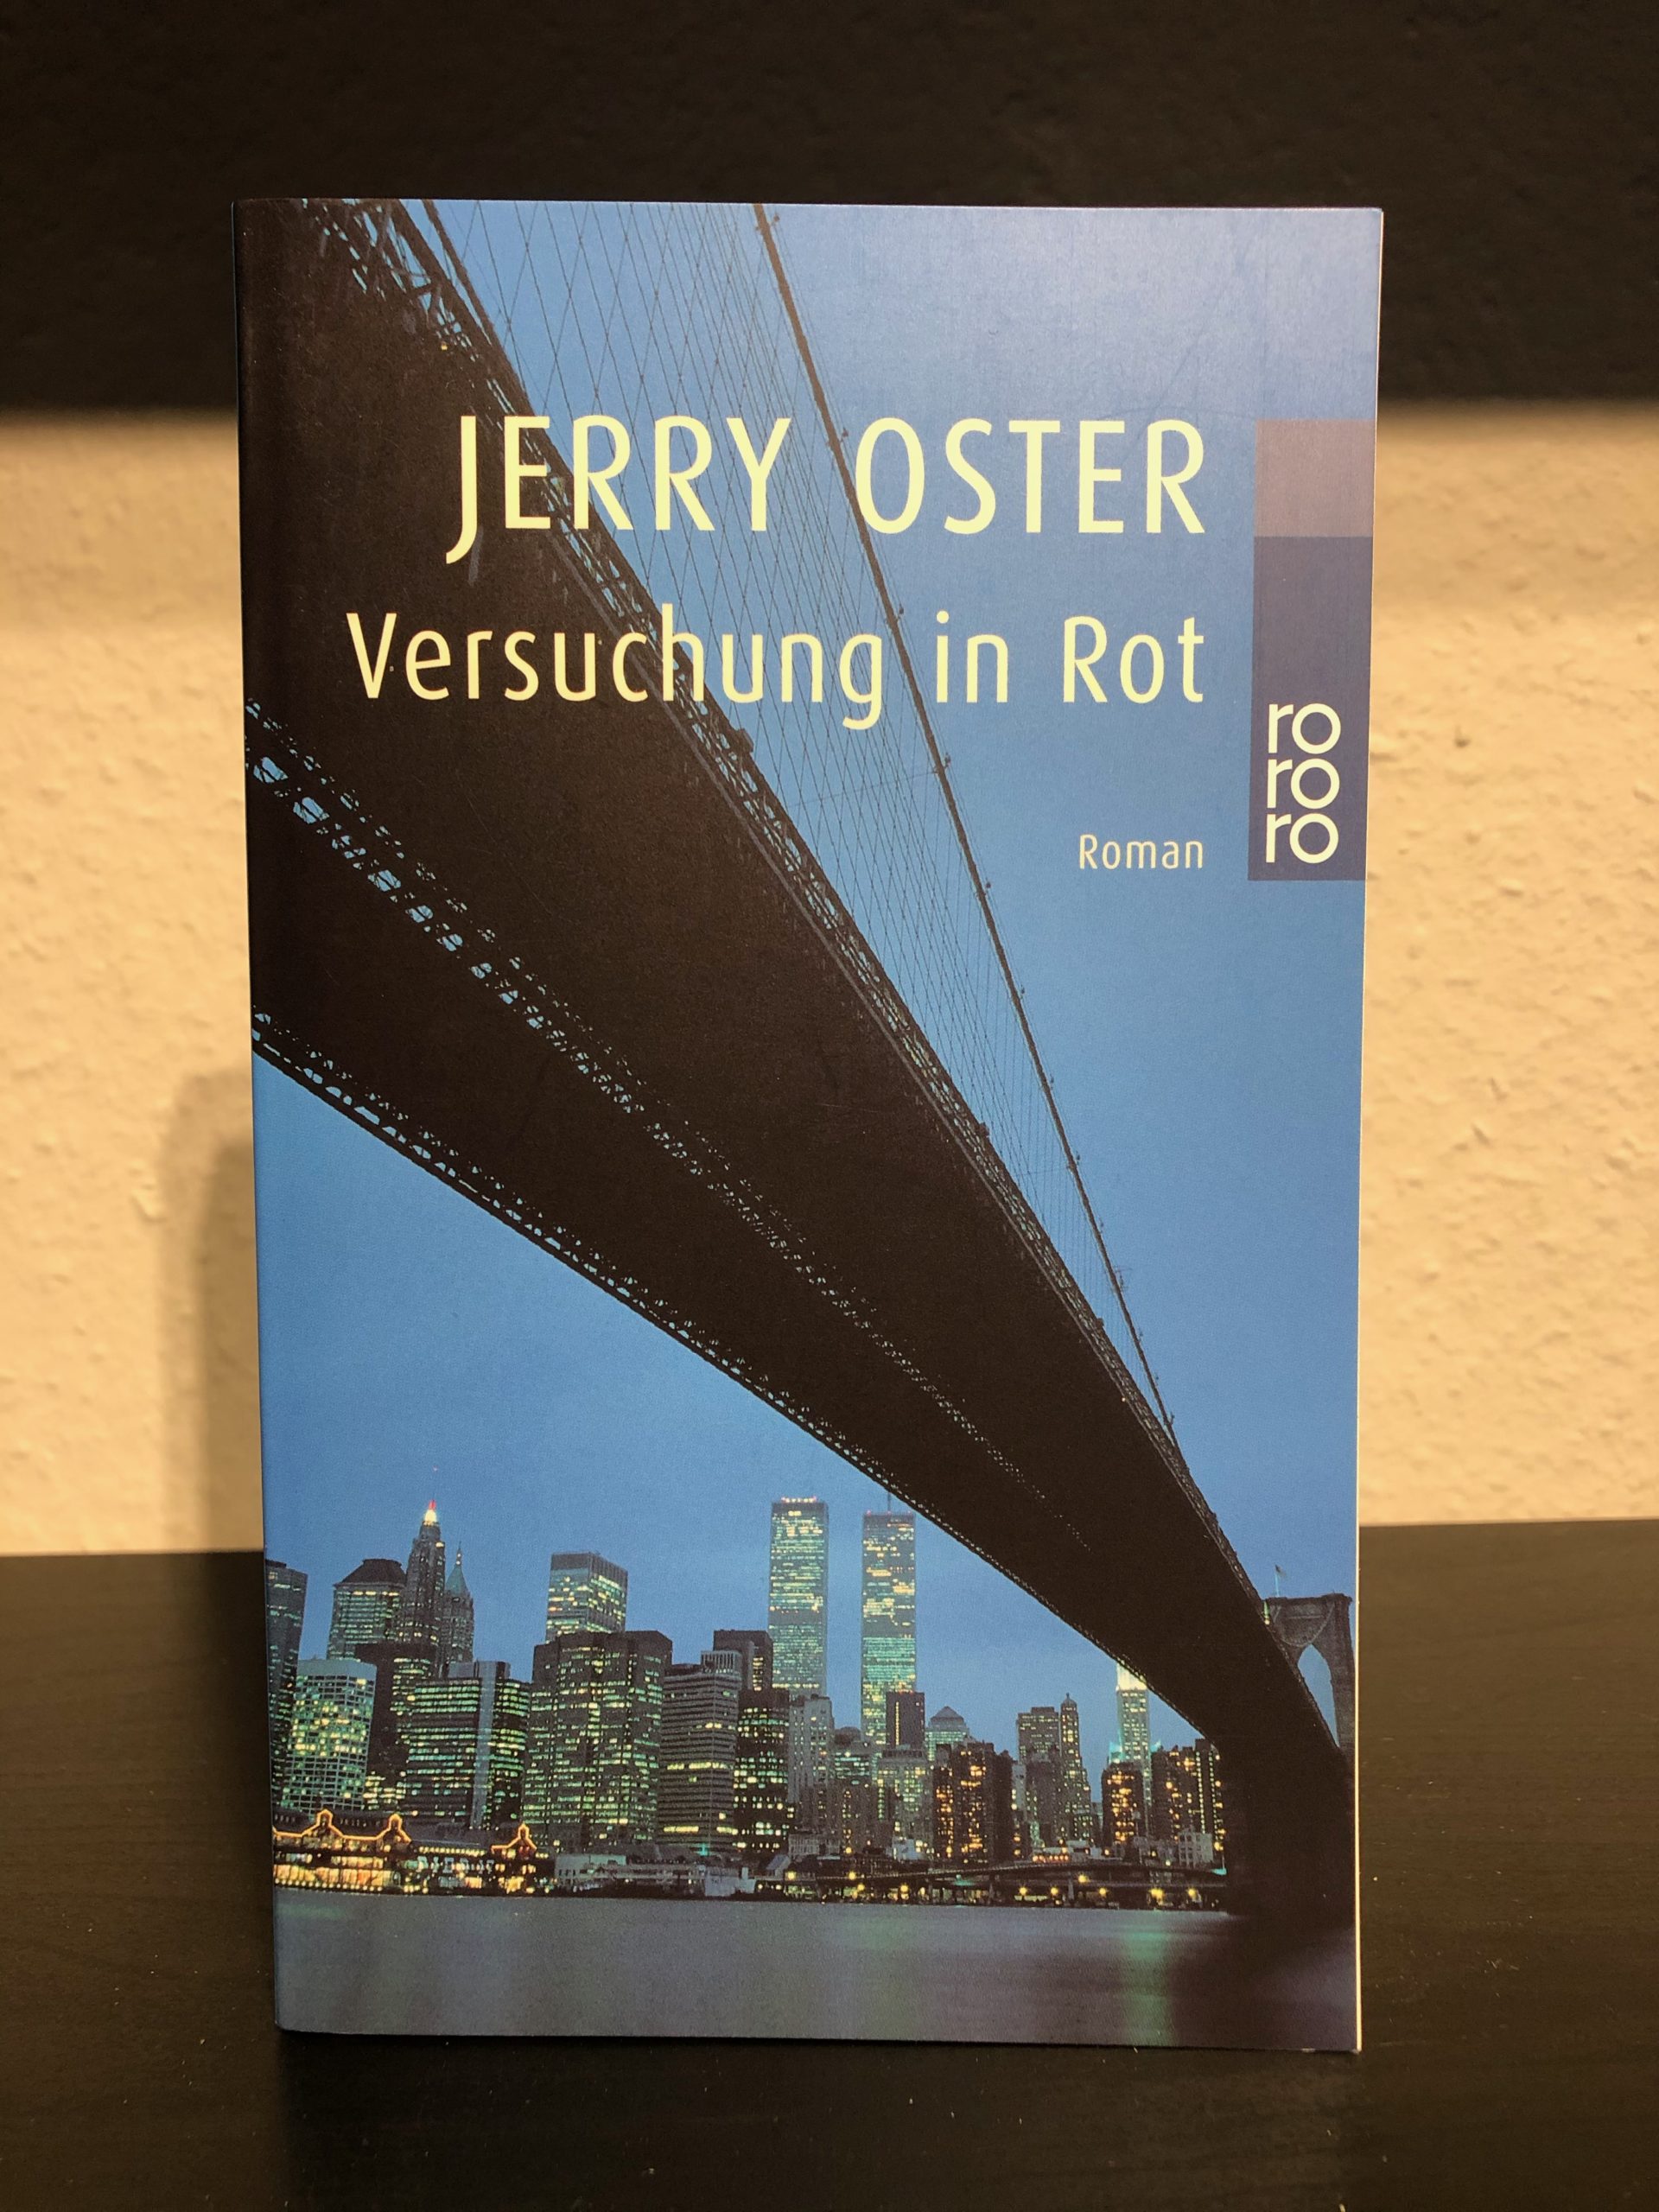 Versuchung in Rot - Jerry Oster main image